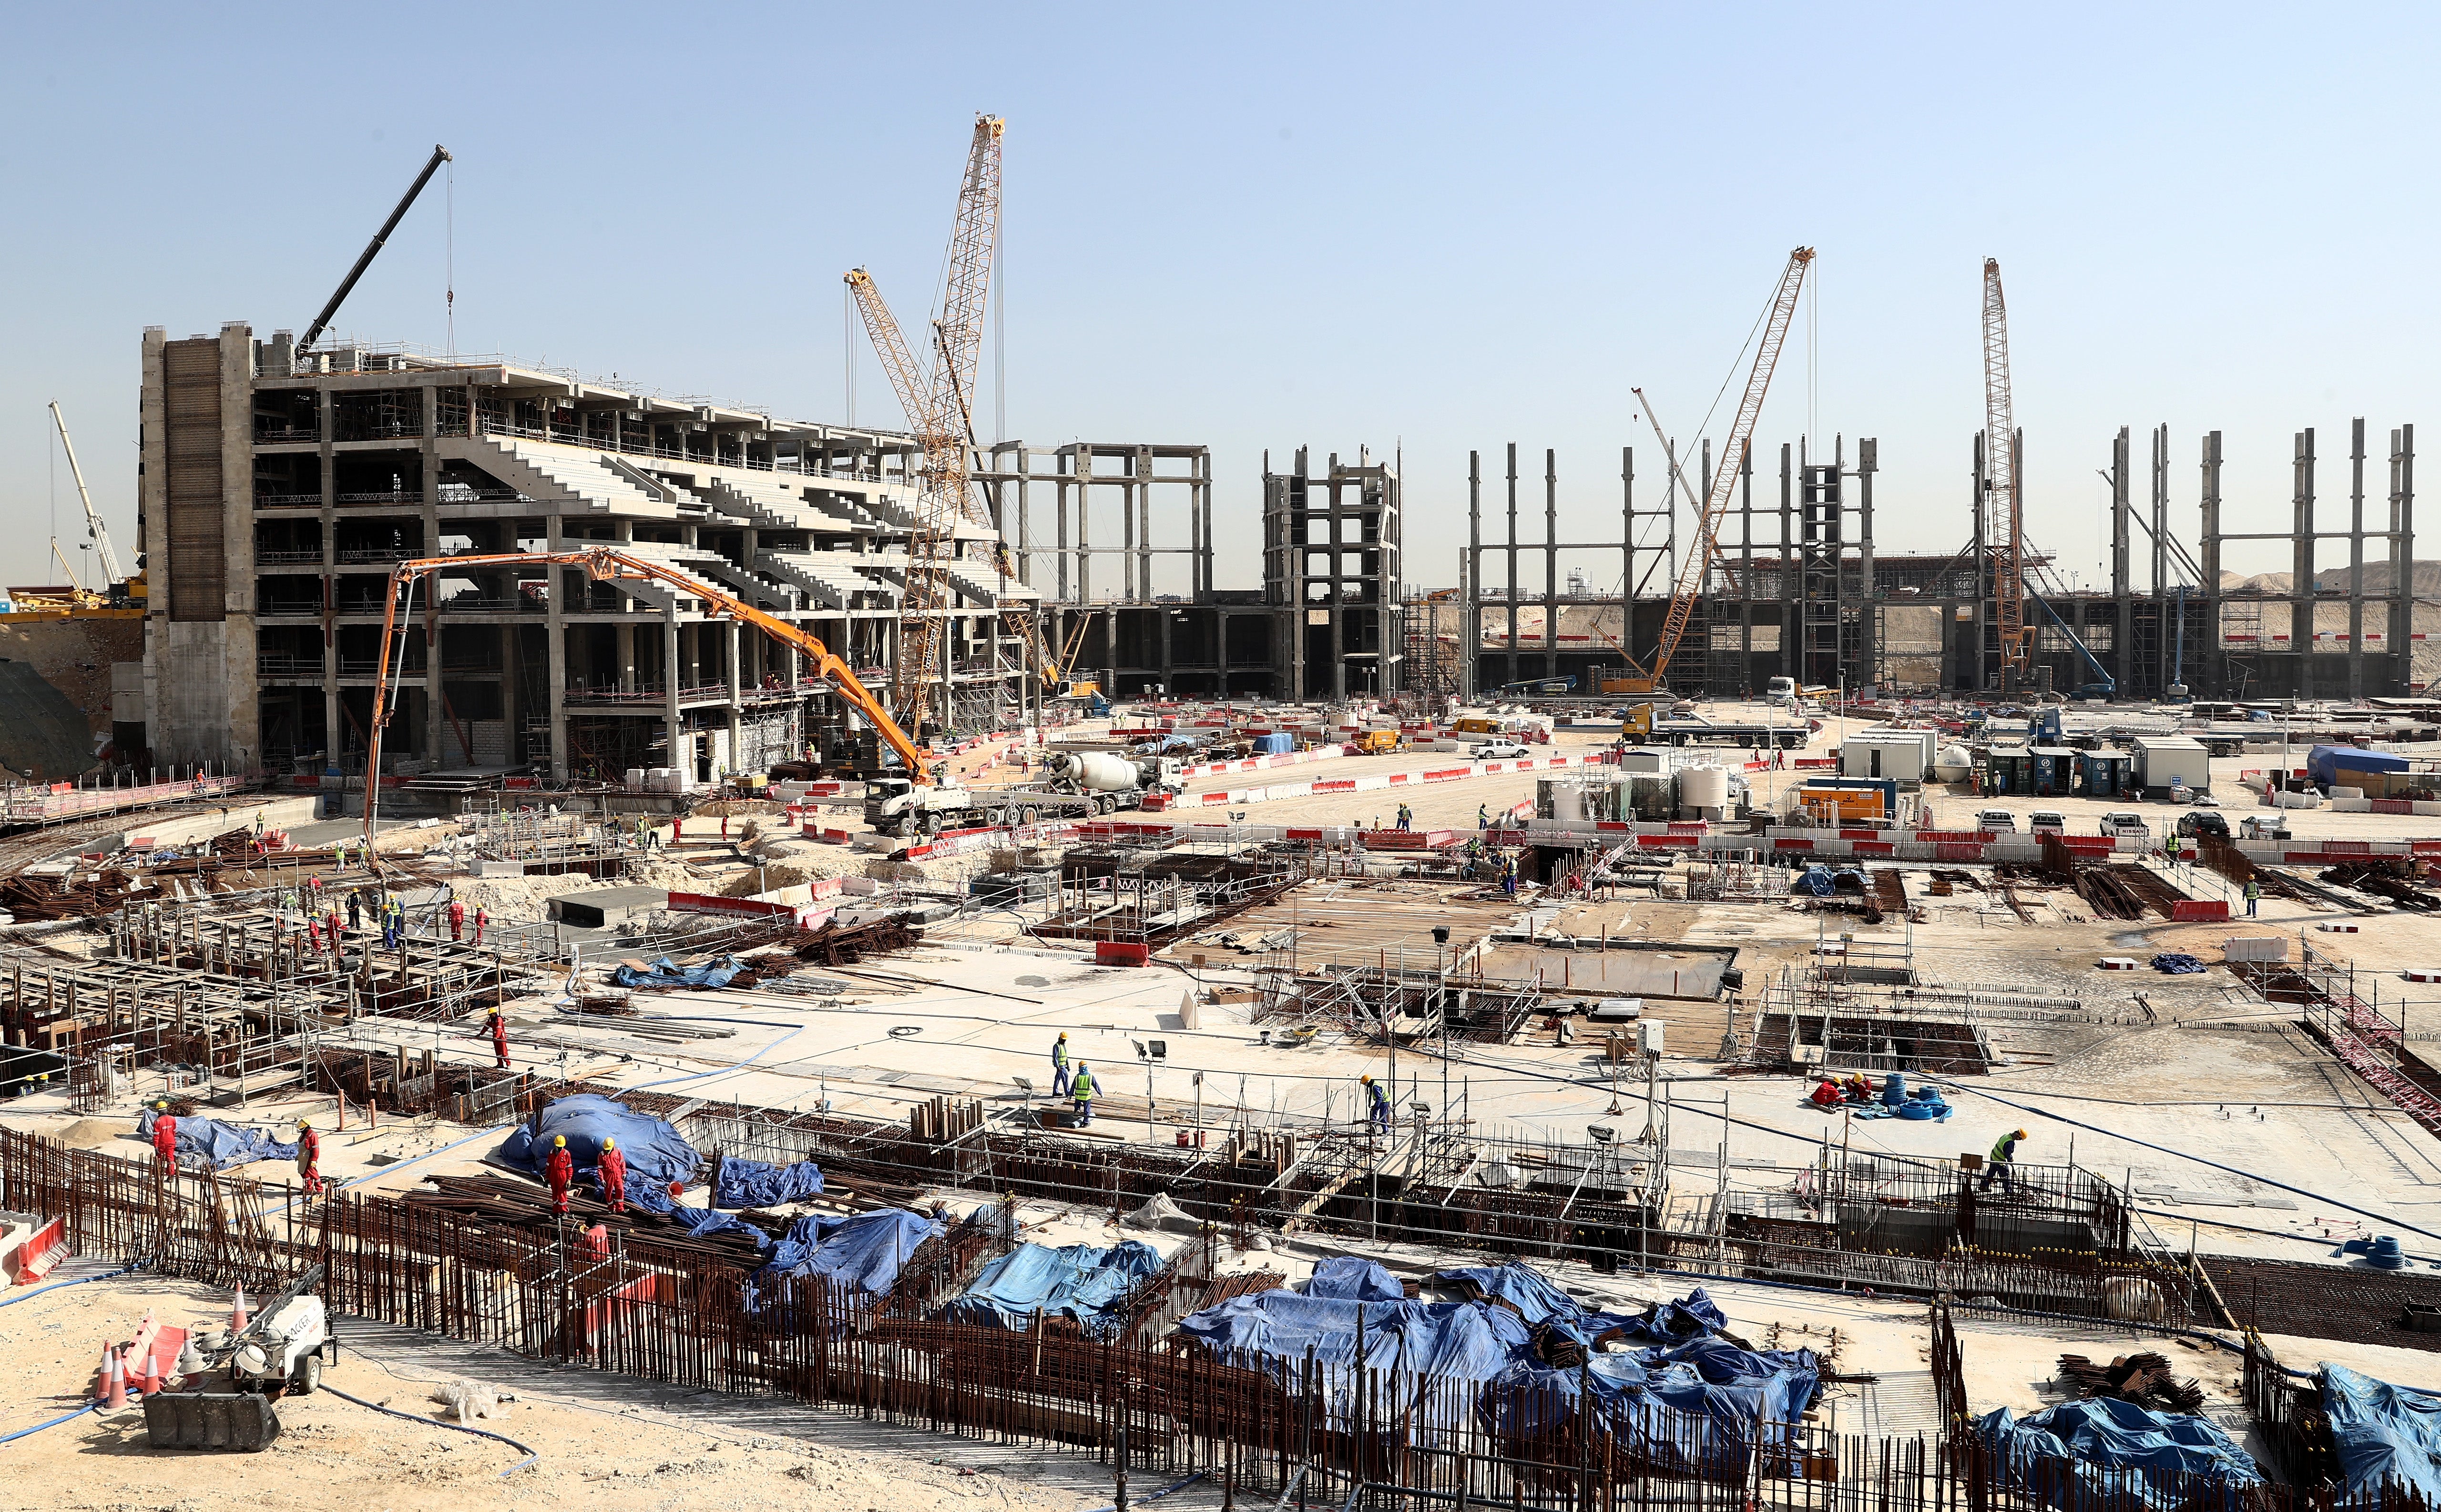 The construction site of the Al Bayt Stadium, and the workers’ accommodation, in Doha, Qatar, from 2017